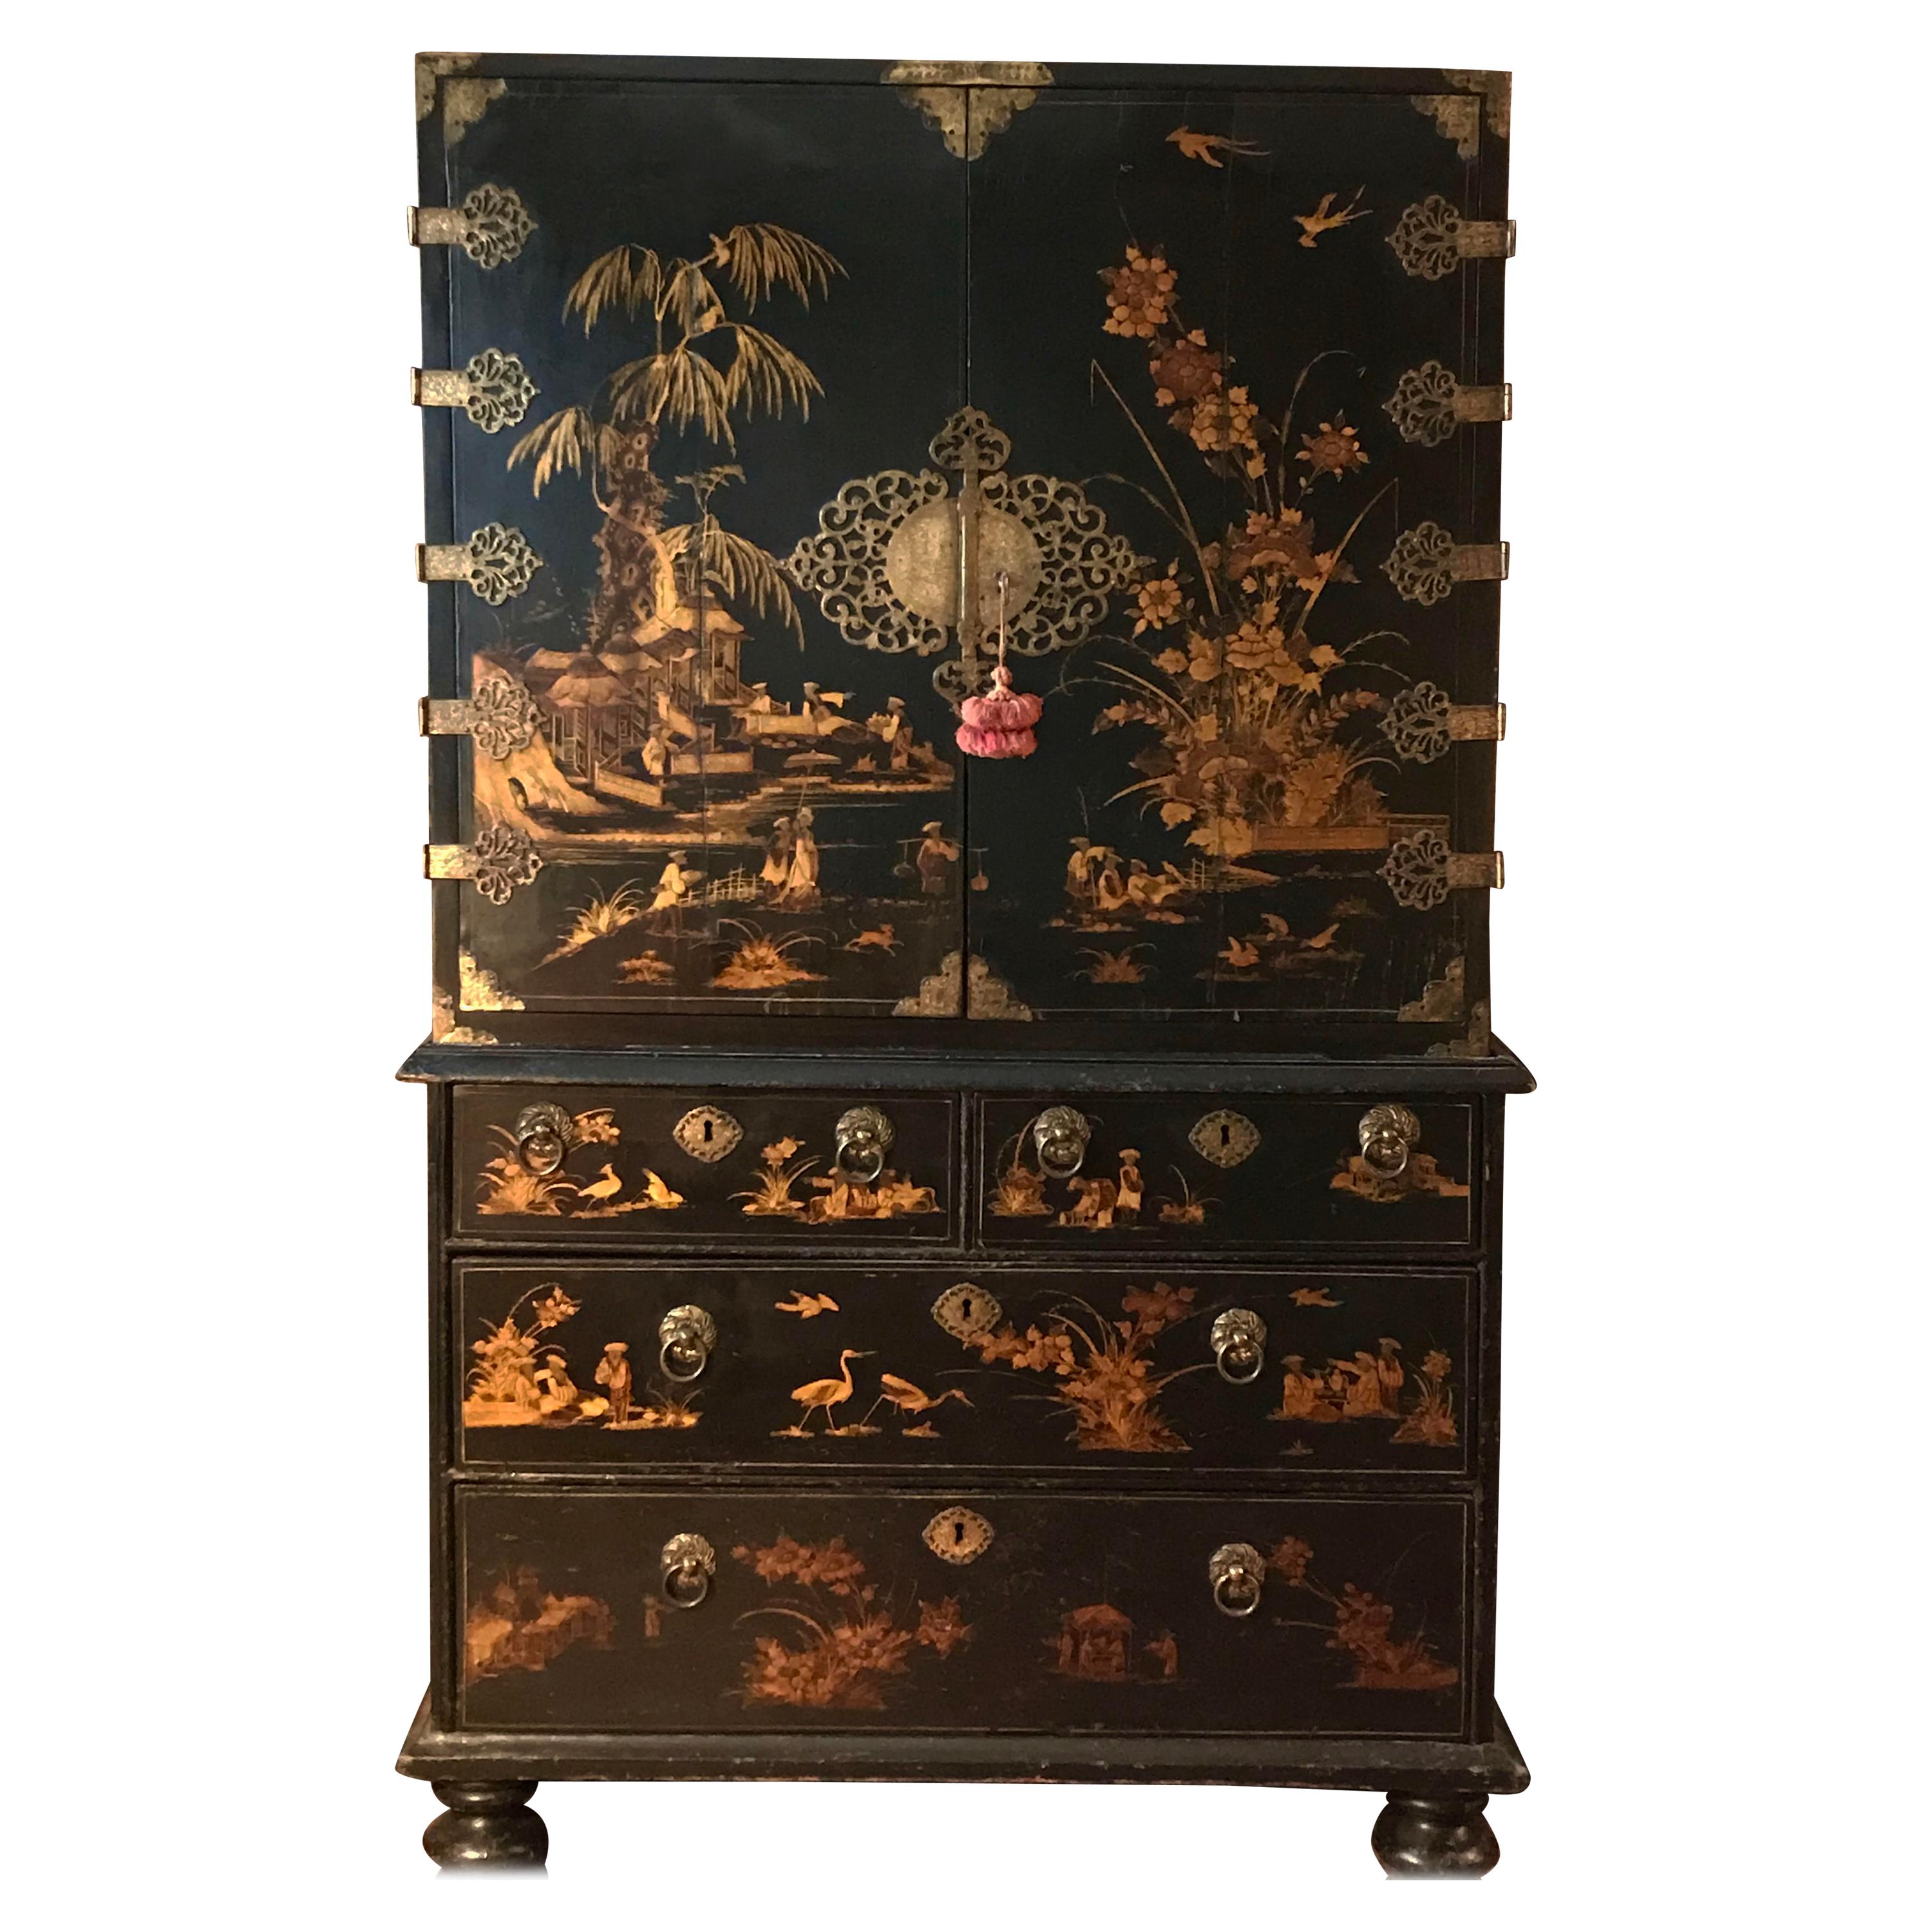 William & Mary period japanned/ lacquer cabinet - RESERVED